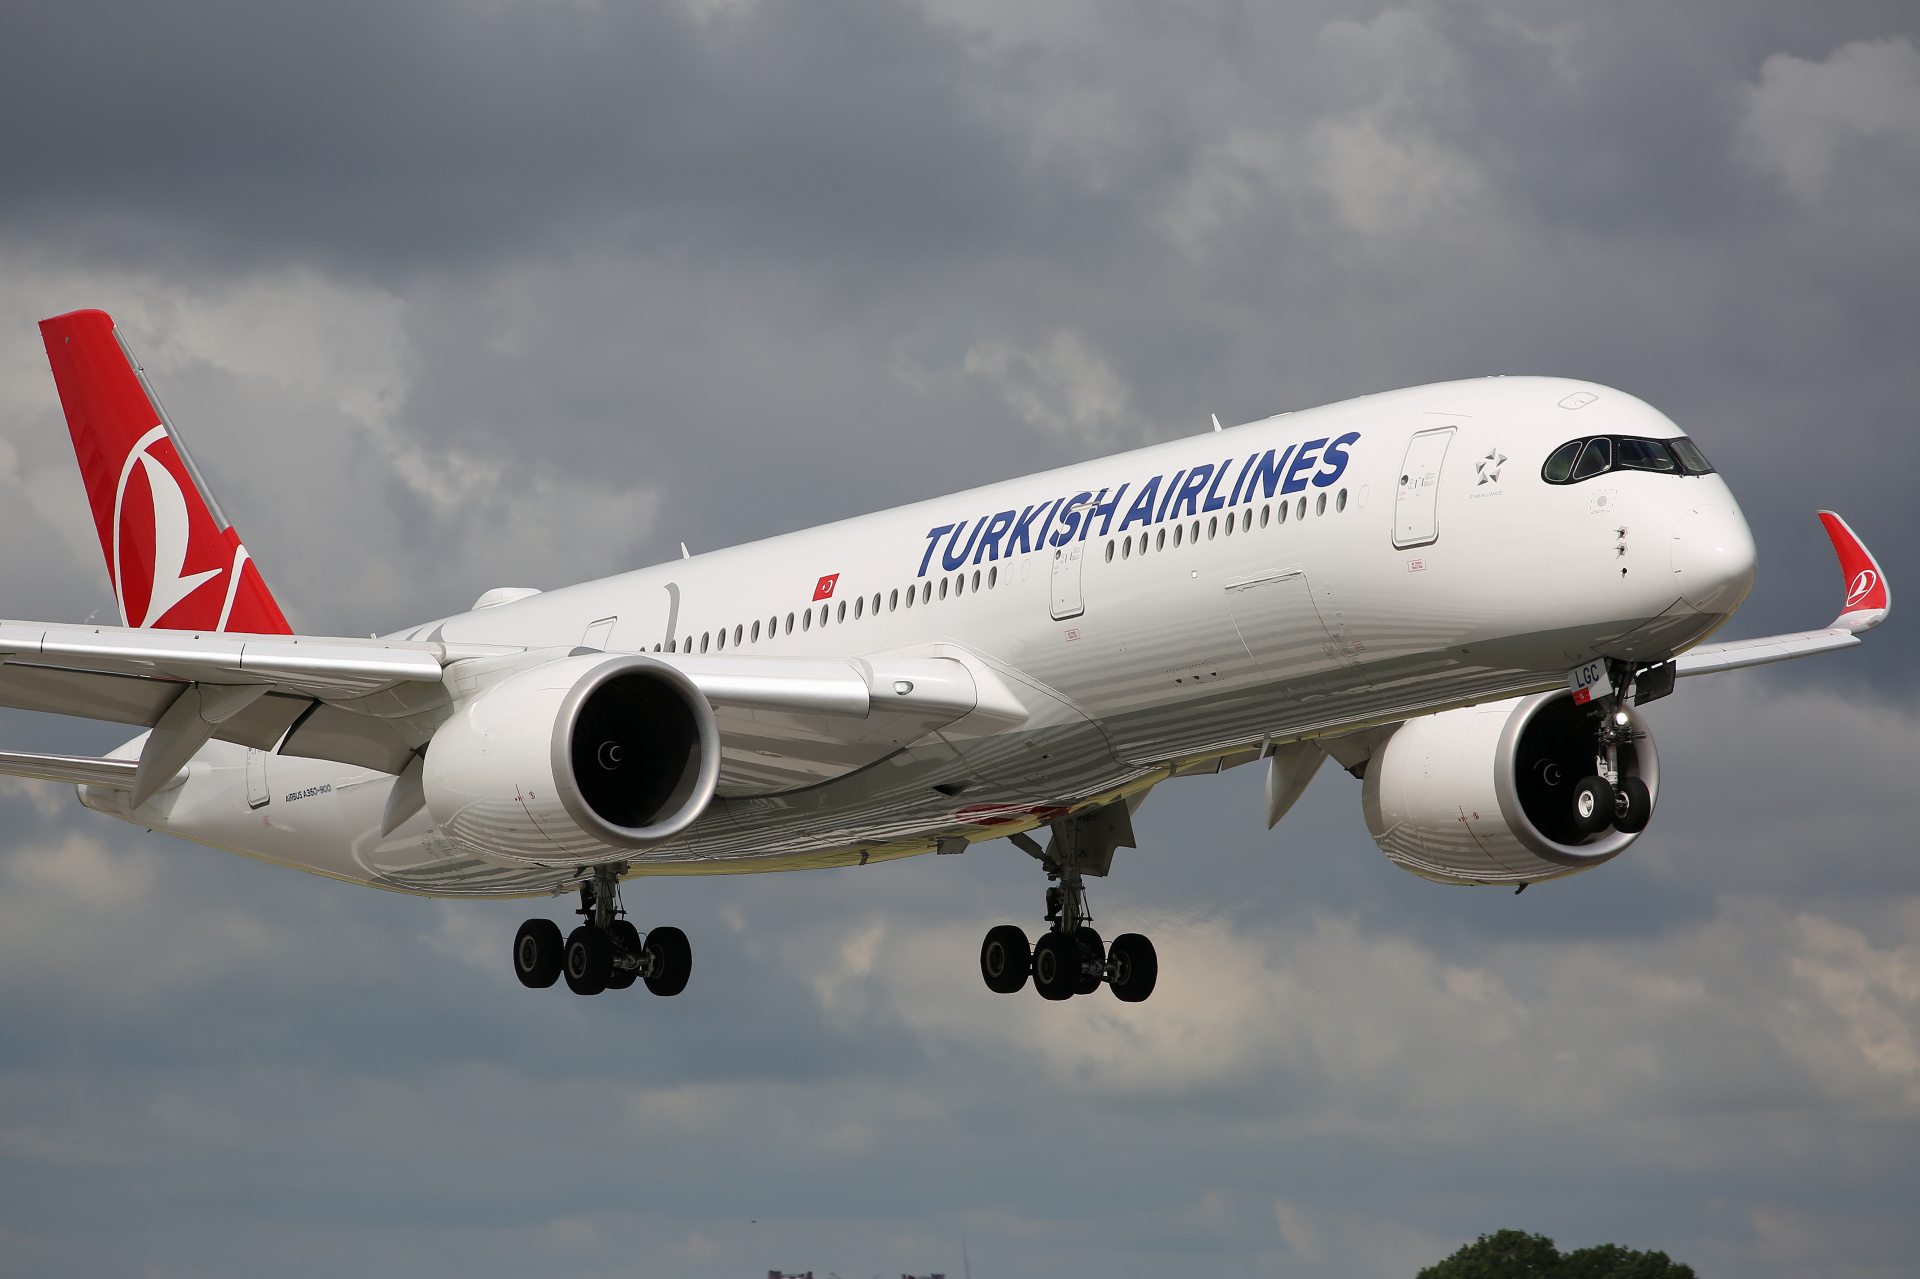 TC-LGC (Aircraft » Schiphol Spotting » Airbus A350-900 » THY Turkish Airlines)